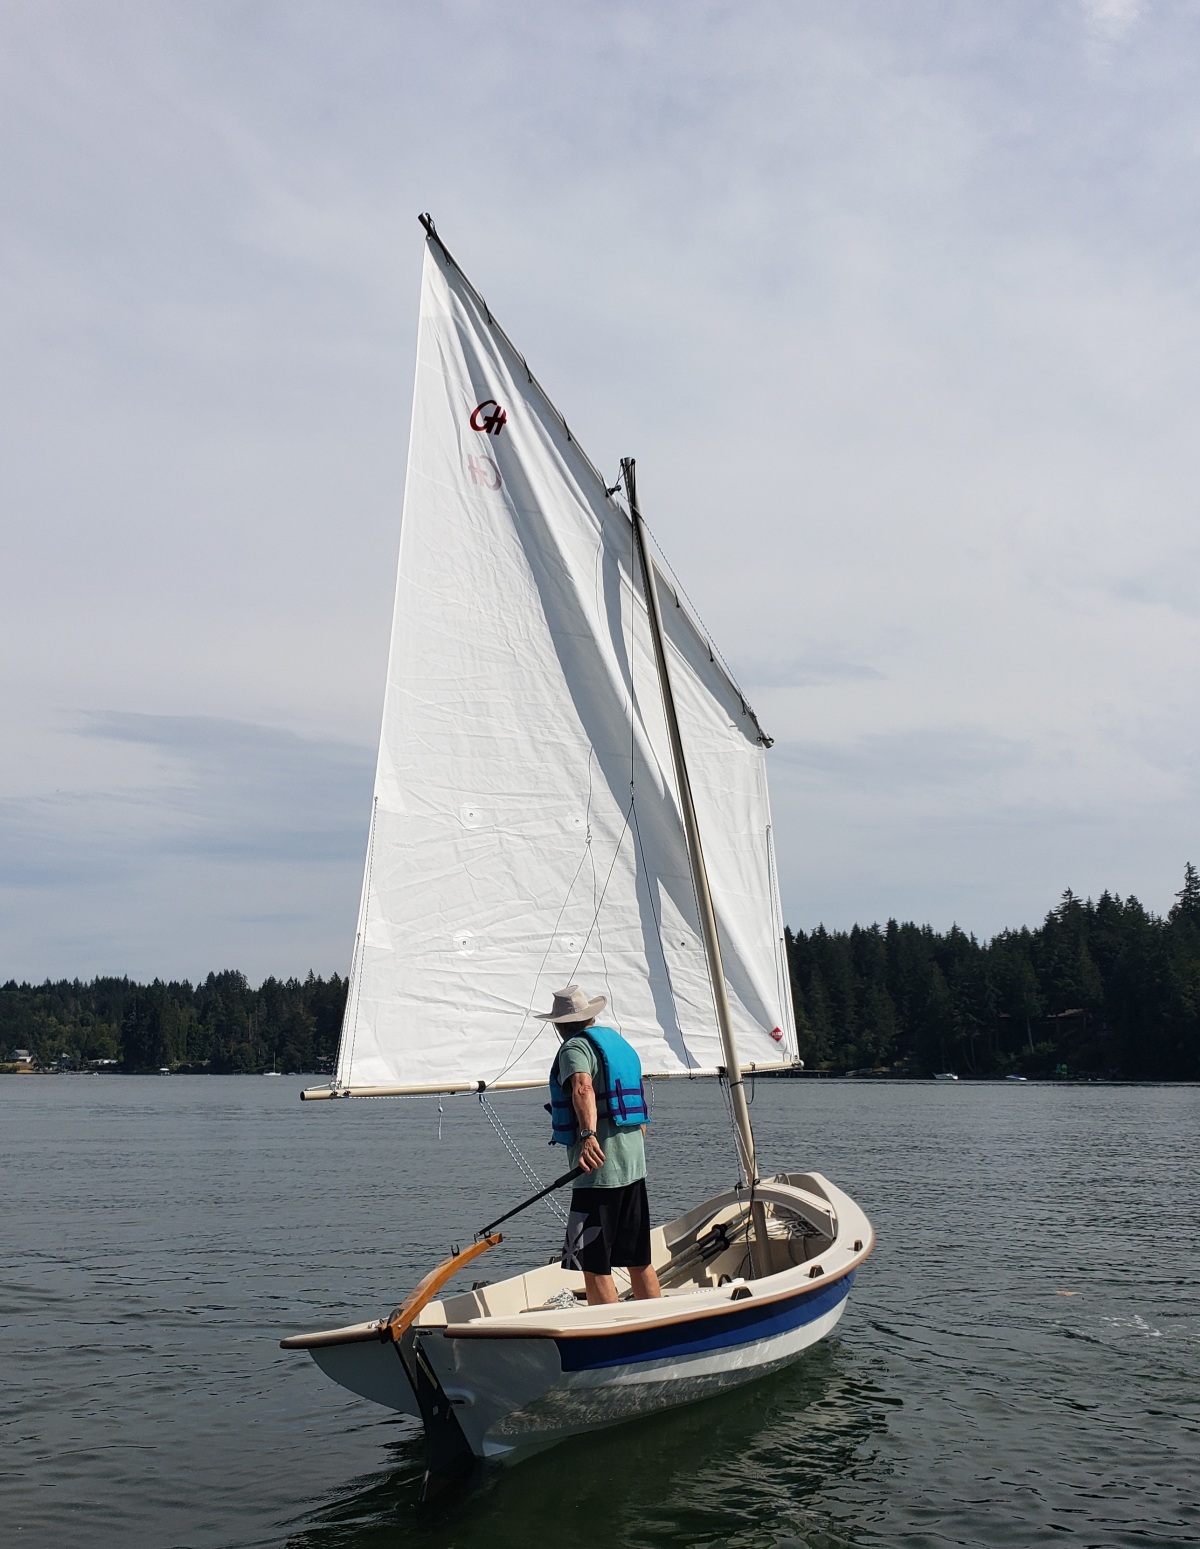 Rear quarter view of the Salish Voyager under sail